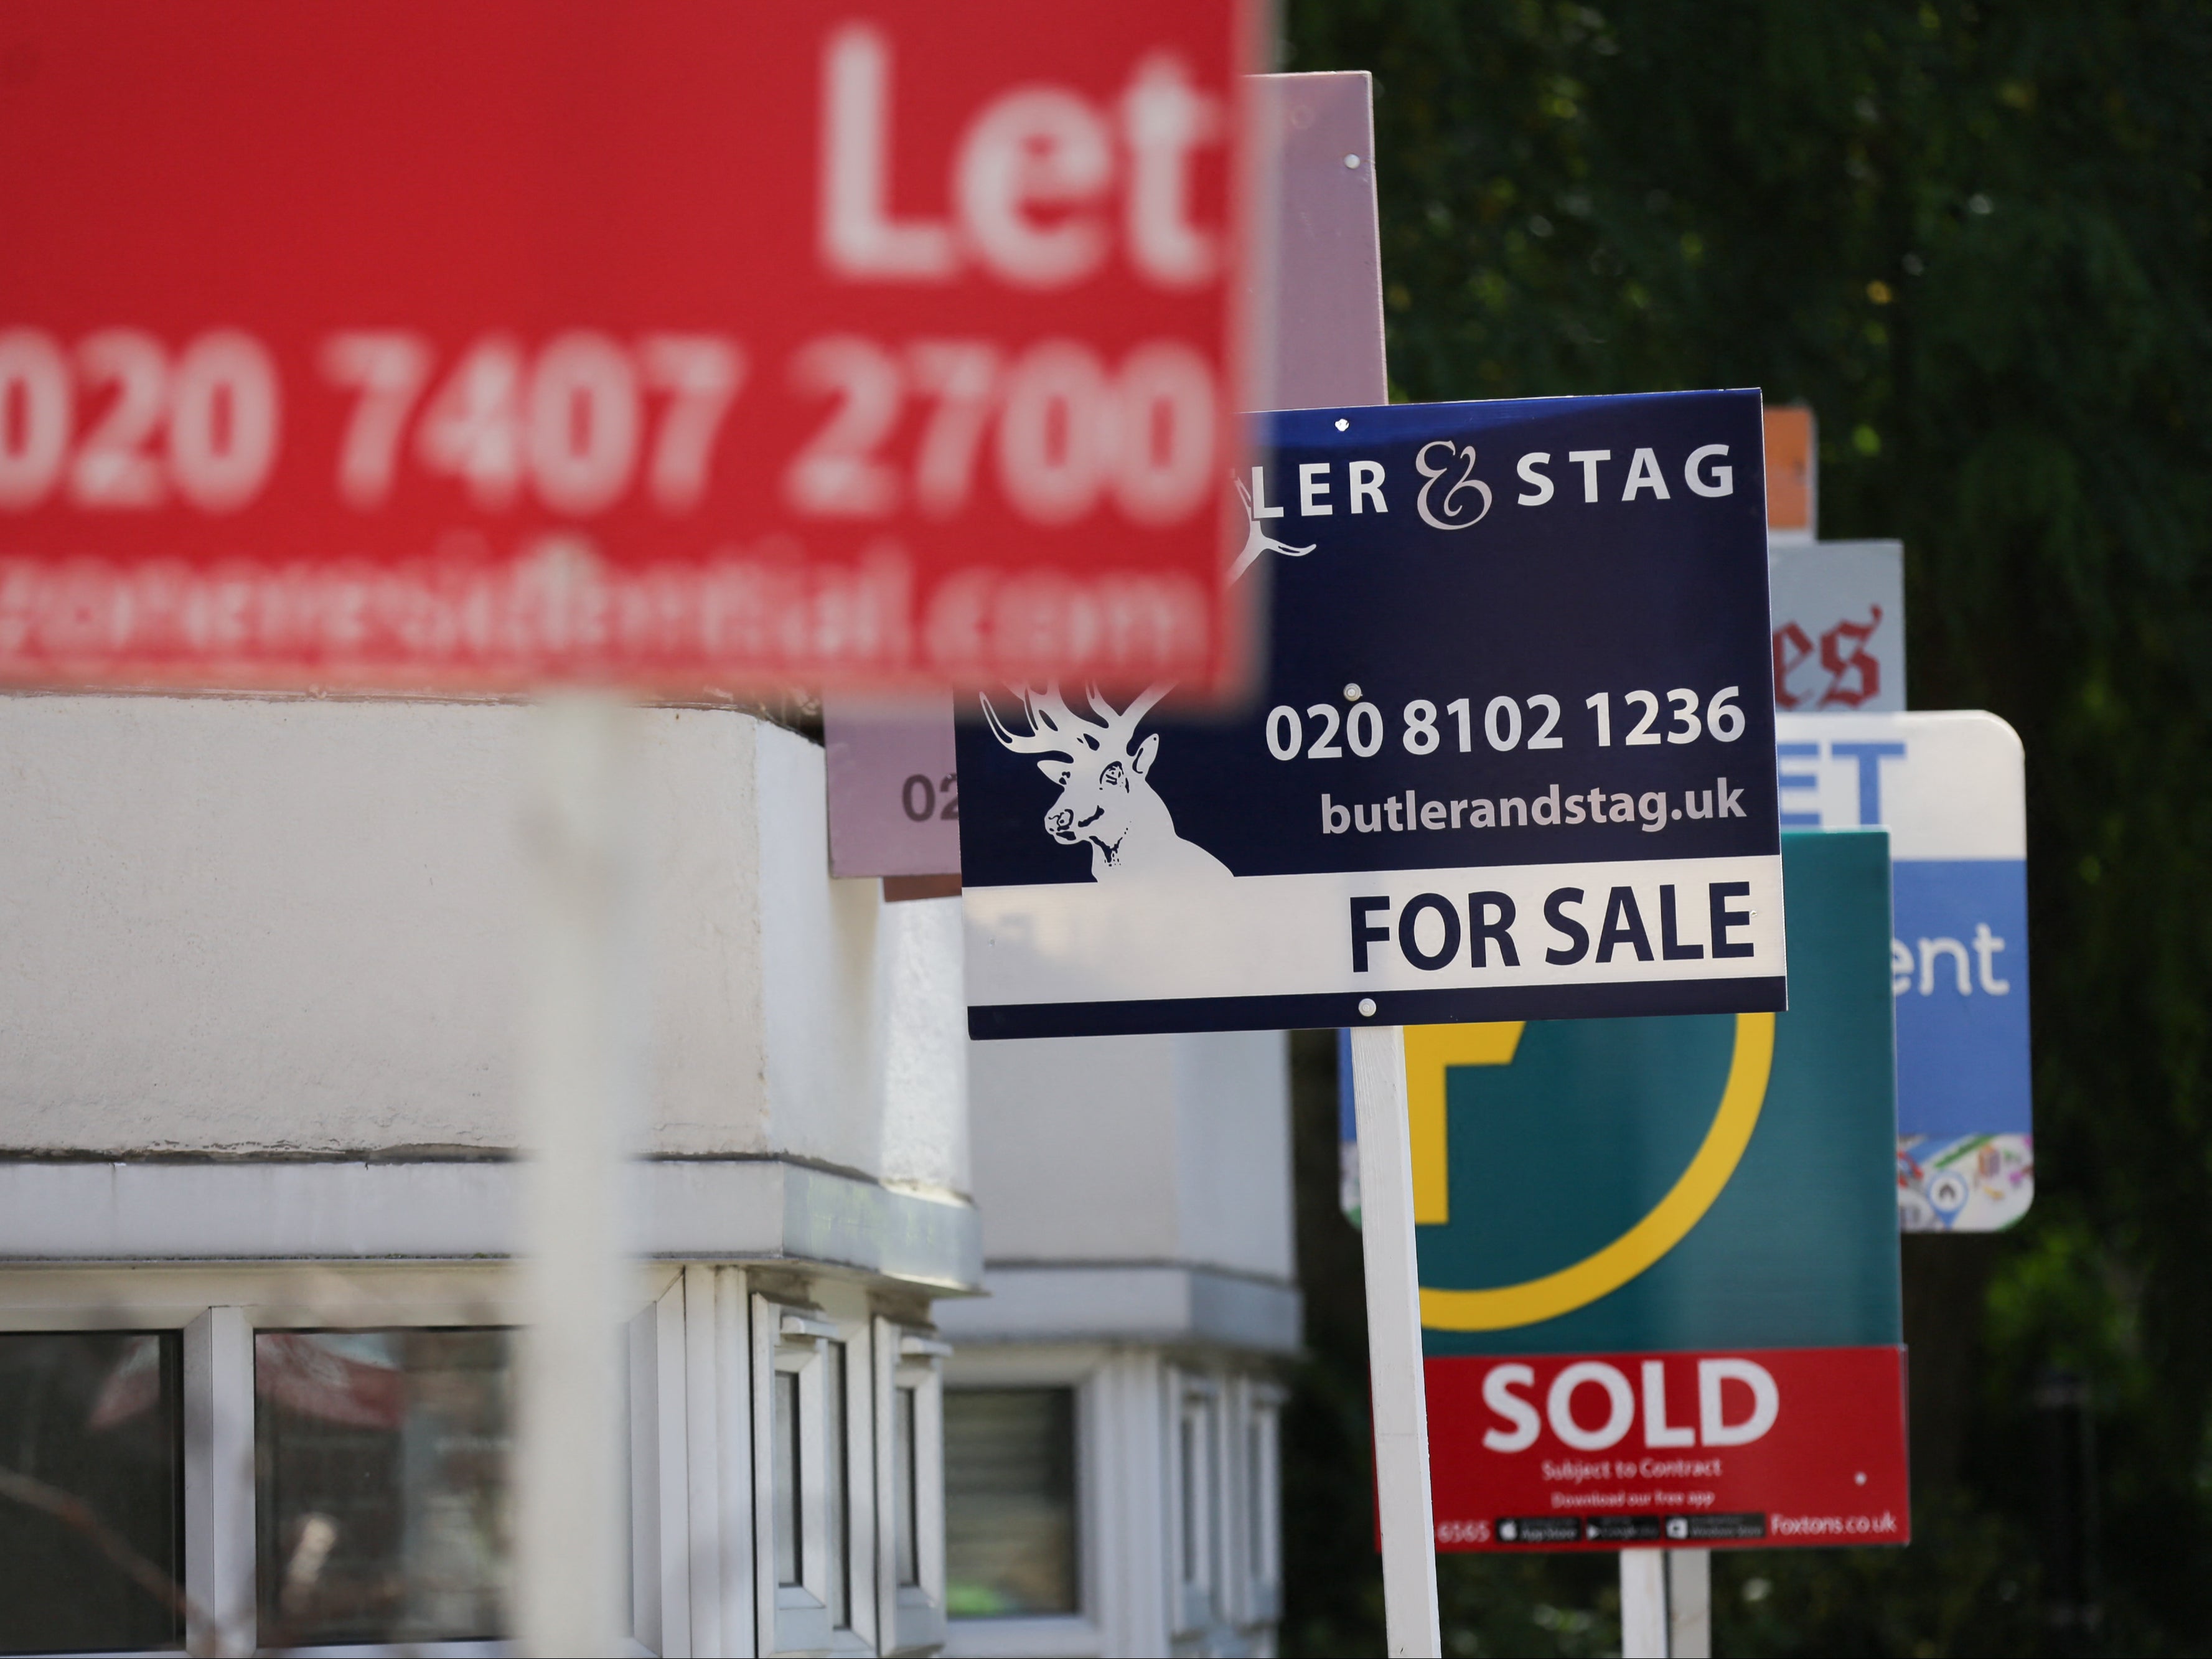 The HomeOwners Alliance said around 26 per cent of first-time buyer transactions were liable for stamp duty in the first quarter of this year